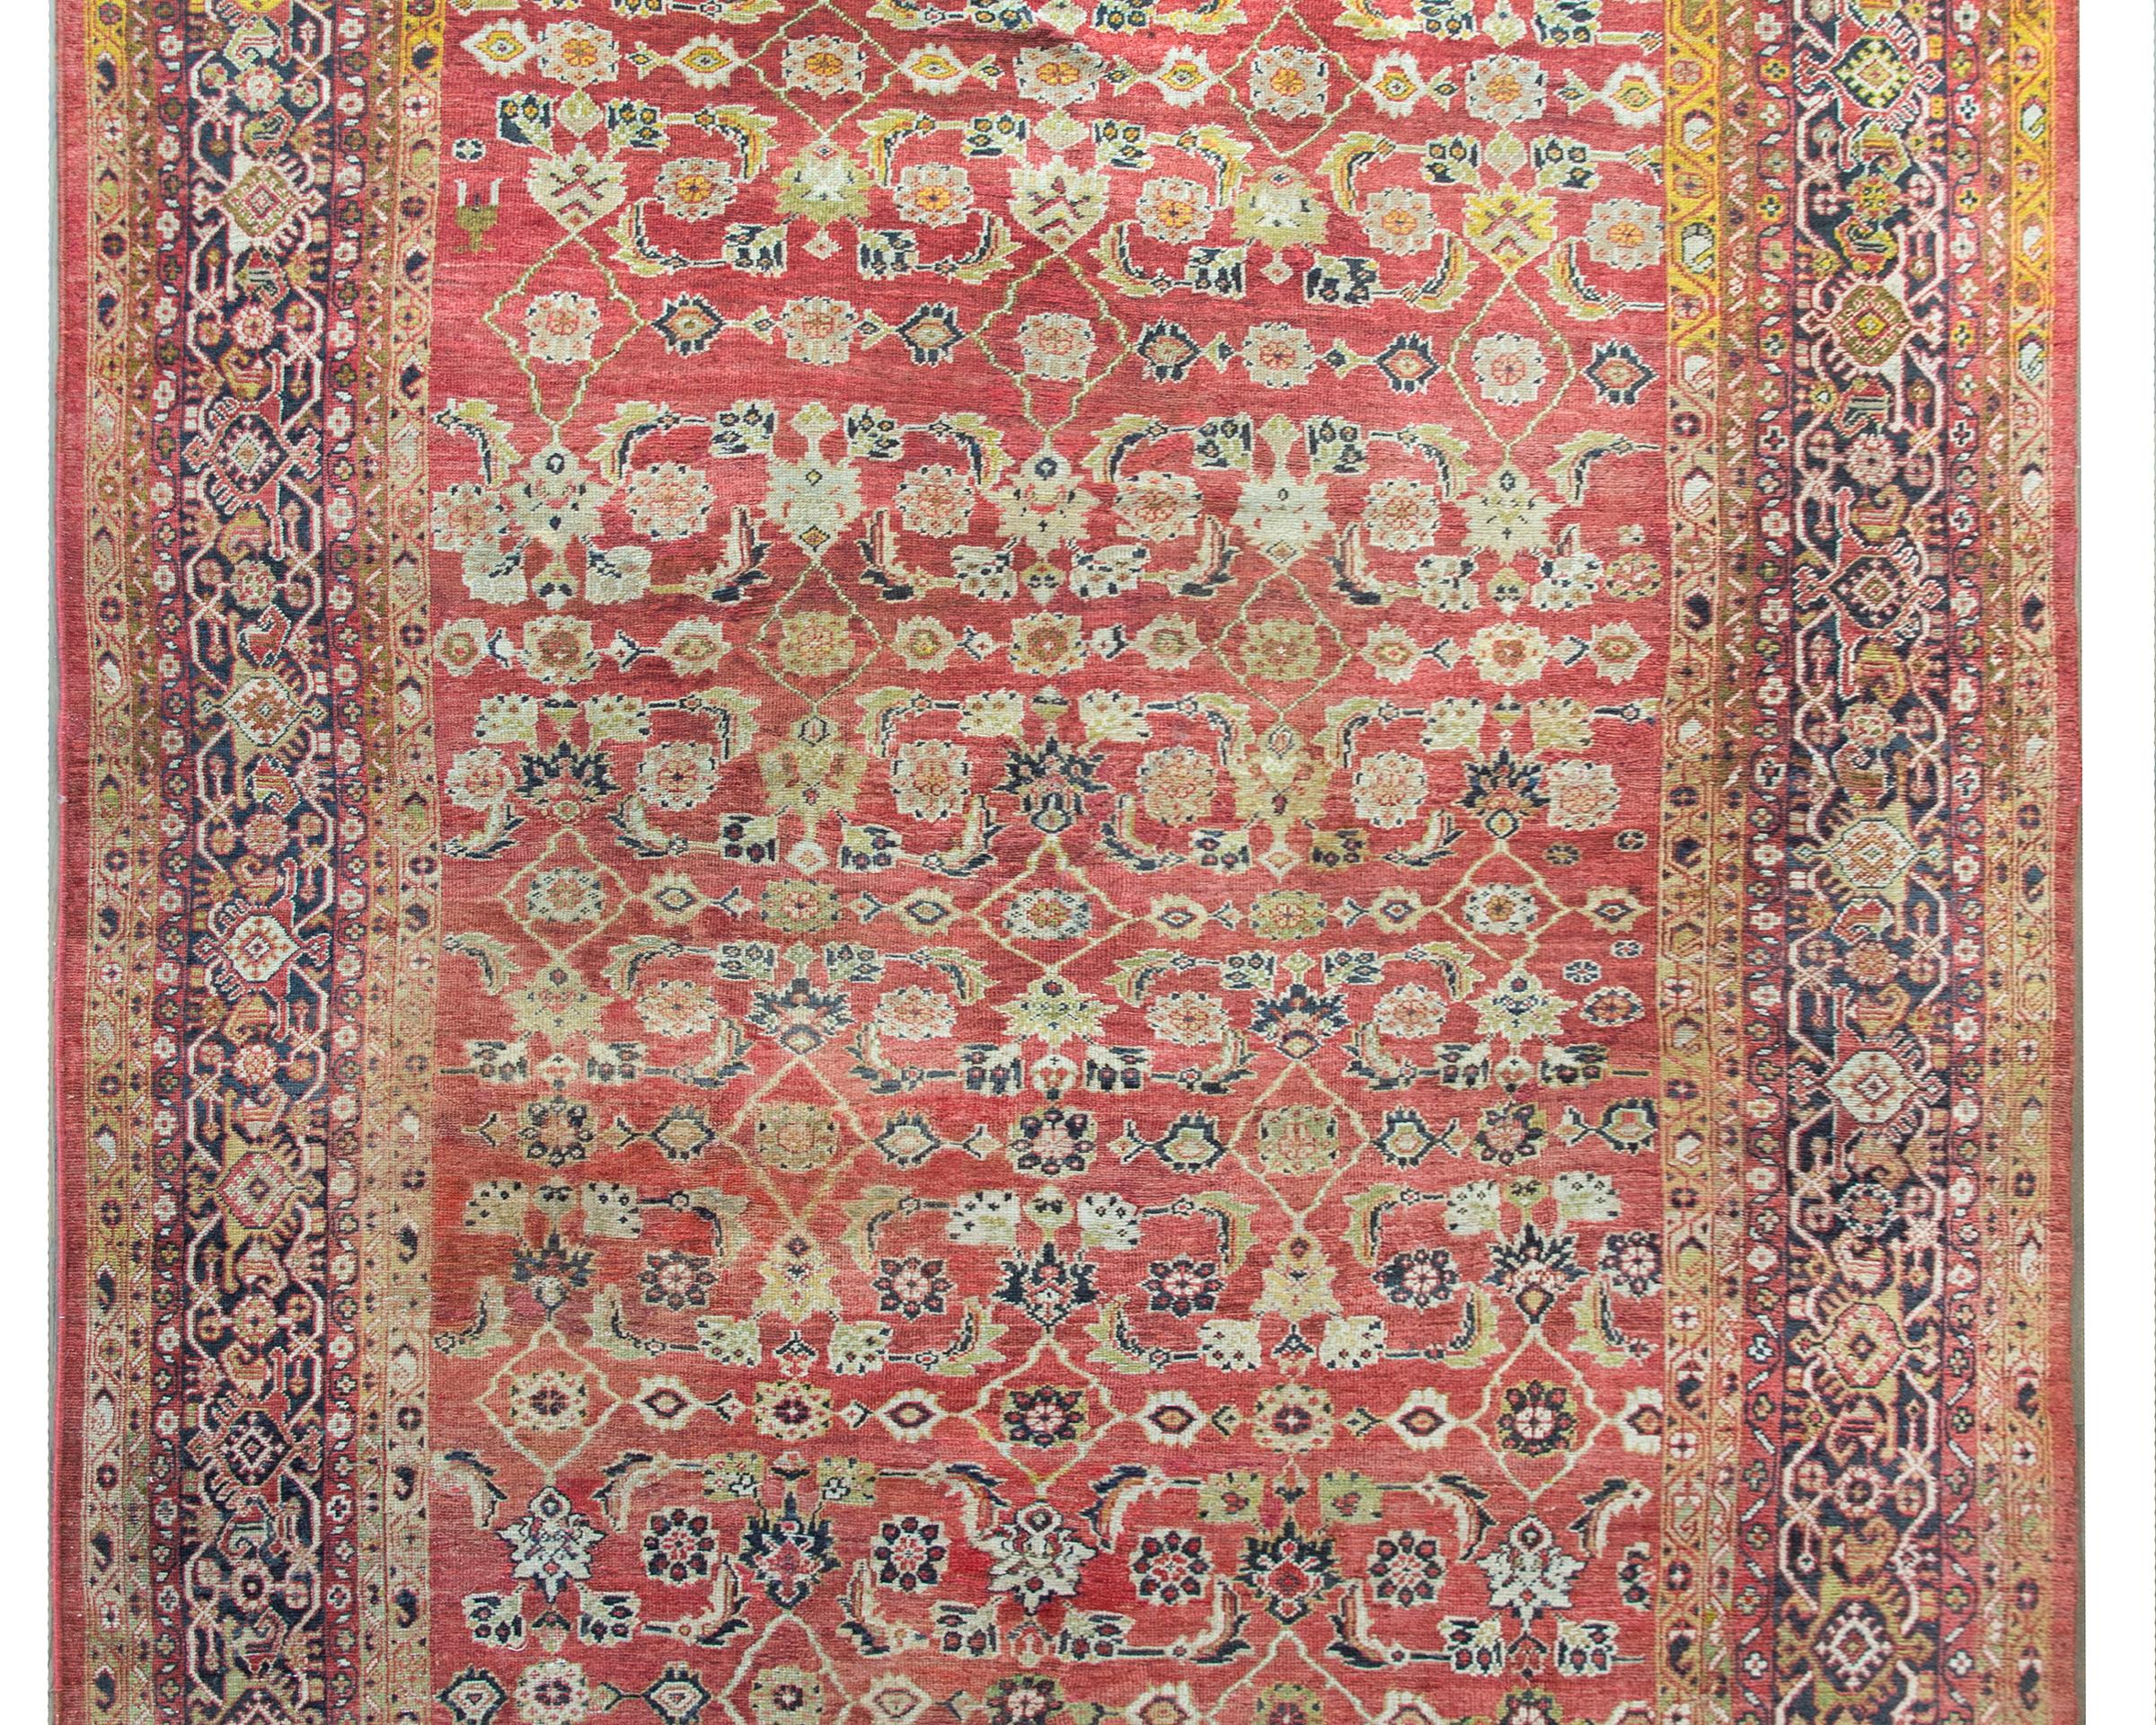 A stunning early 20th century Persian Sultanabad rug with a fantastic all-over pattern with myriad stylized flowers and leaves woven in gold, cream, pink, and brown set against a coral background.  The border is exceptional with seven distinct